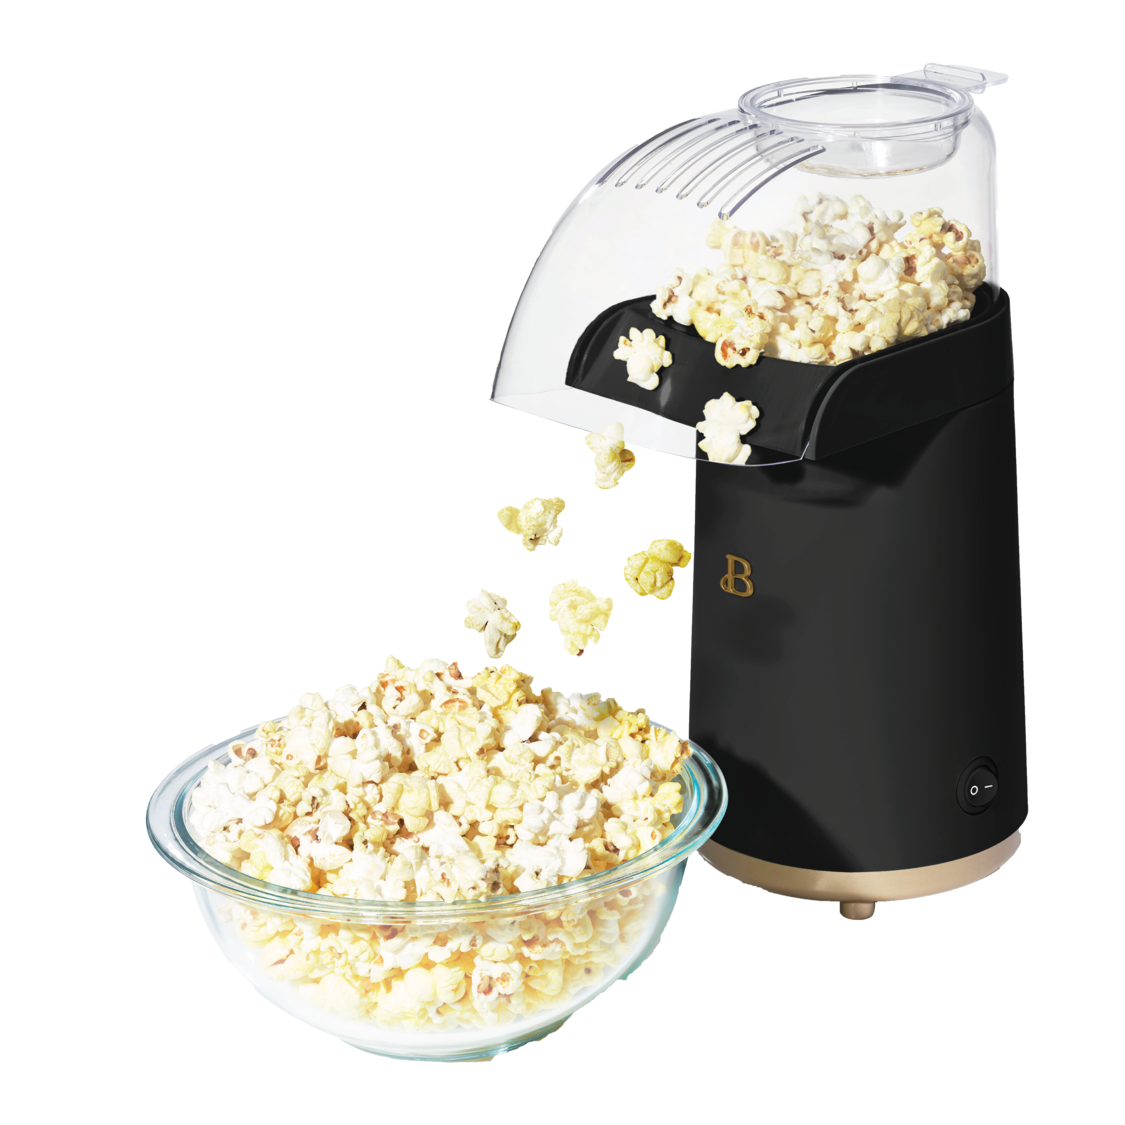 HomeDirect Hot Air Popcorn Popper Maker with Measuring Cup to